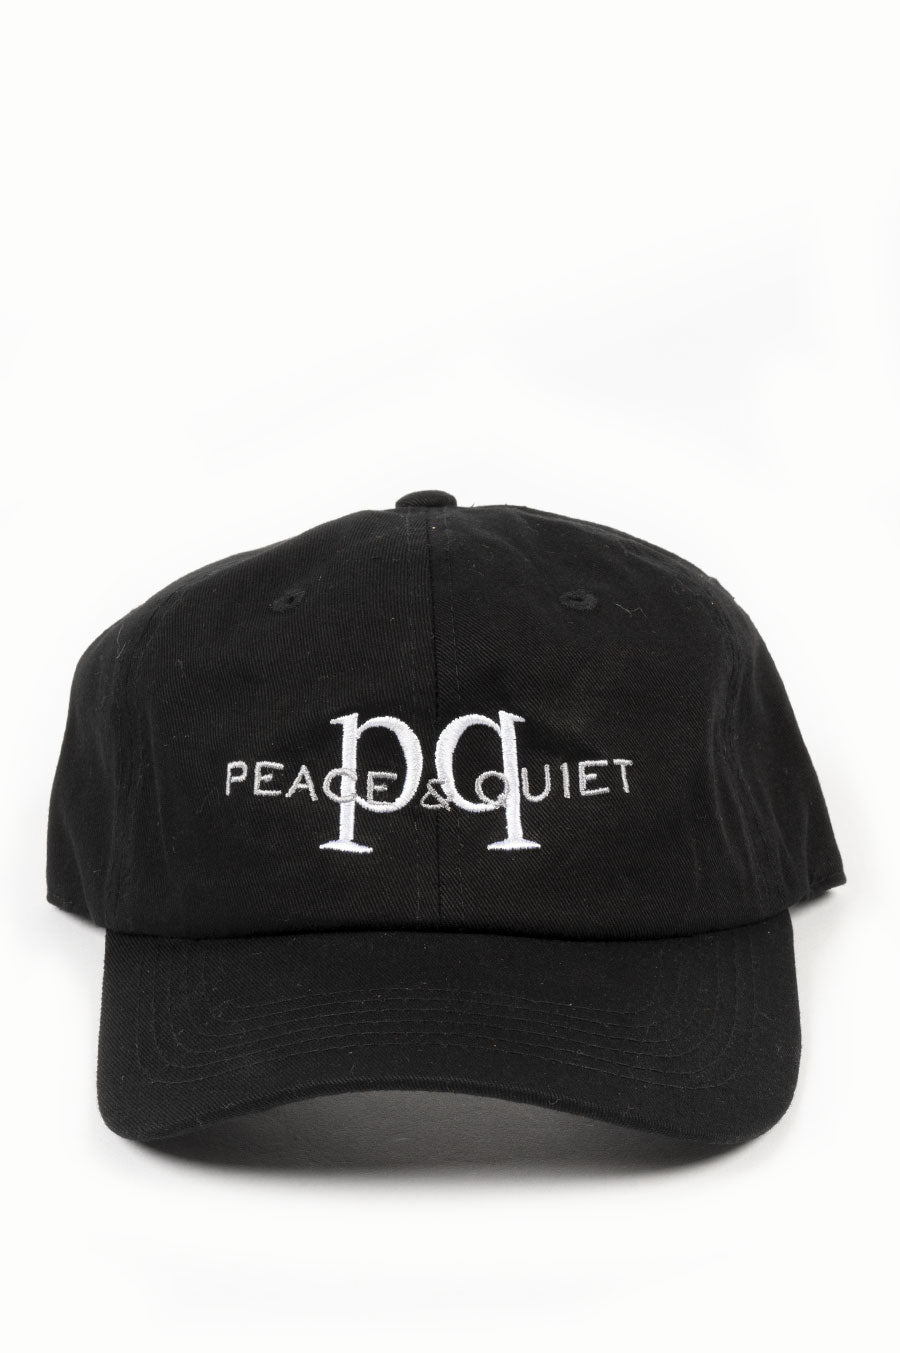 THE MUSEUM OF PEACE AND QUIET HAT LEISURE CO HAT BLACK